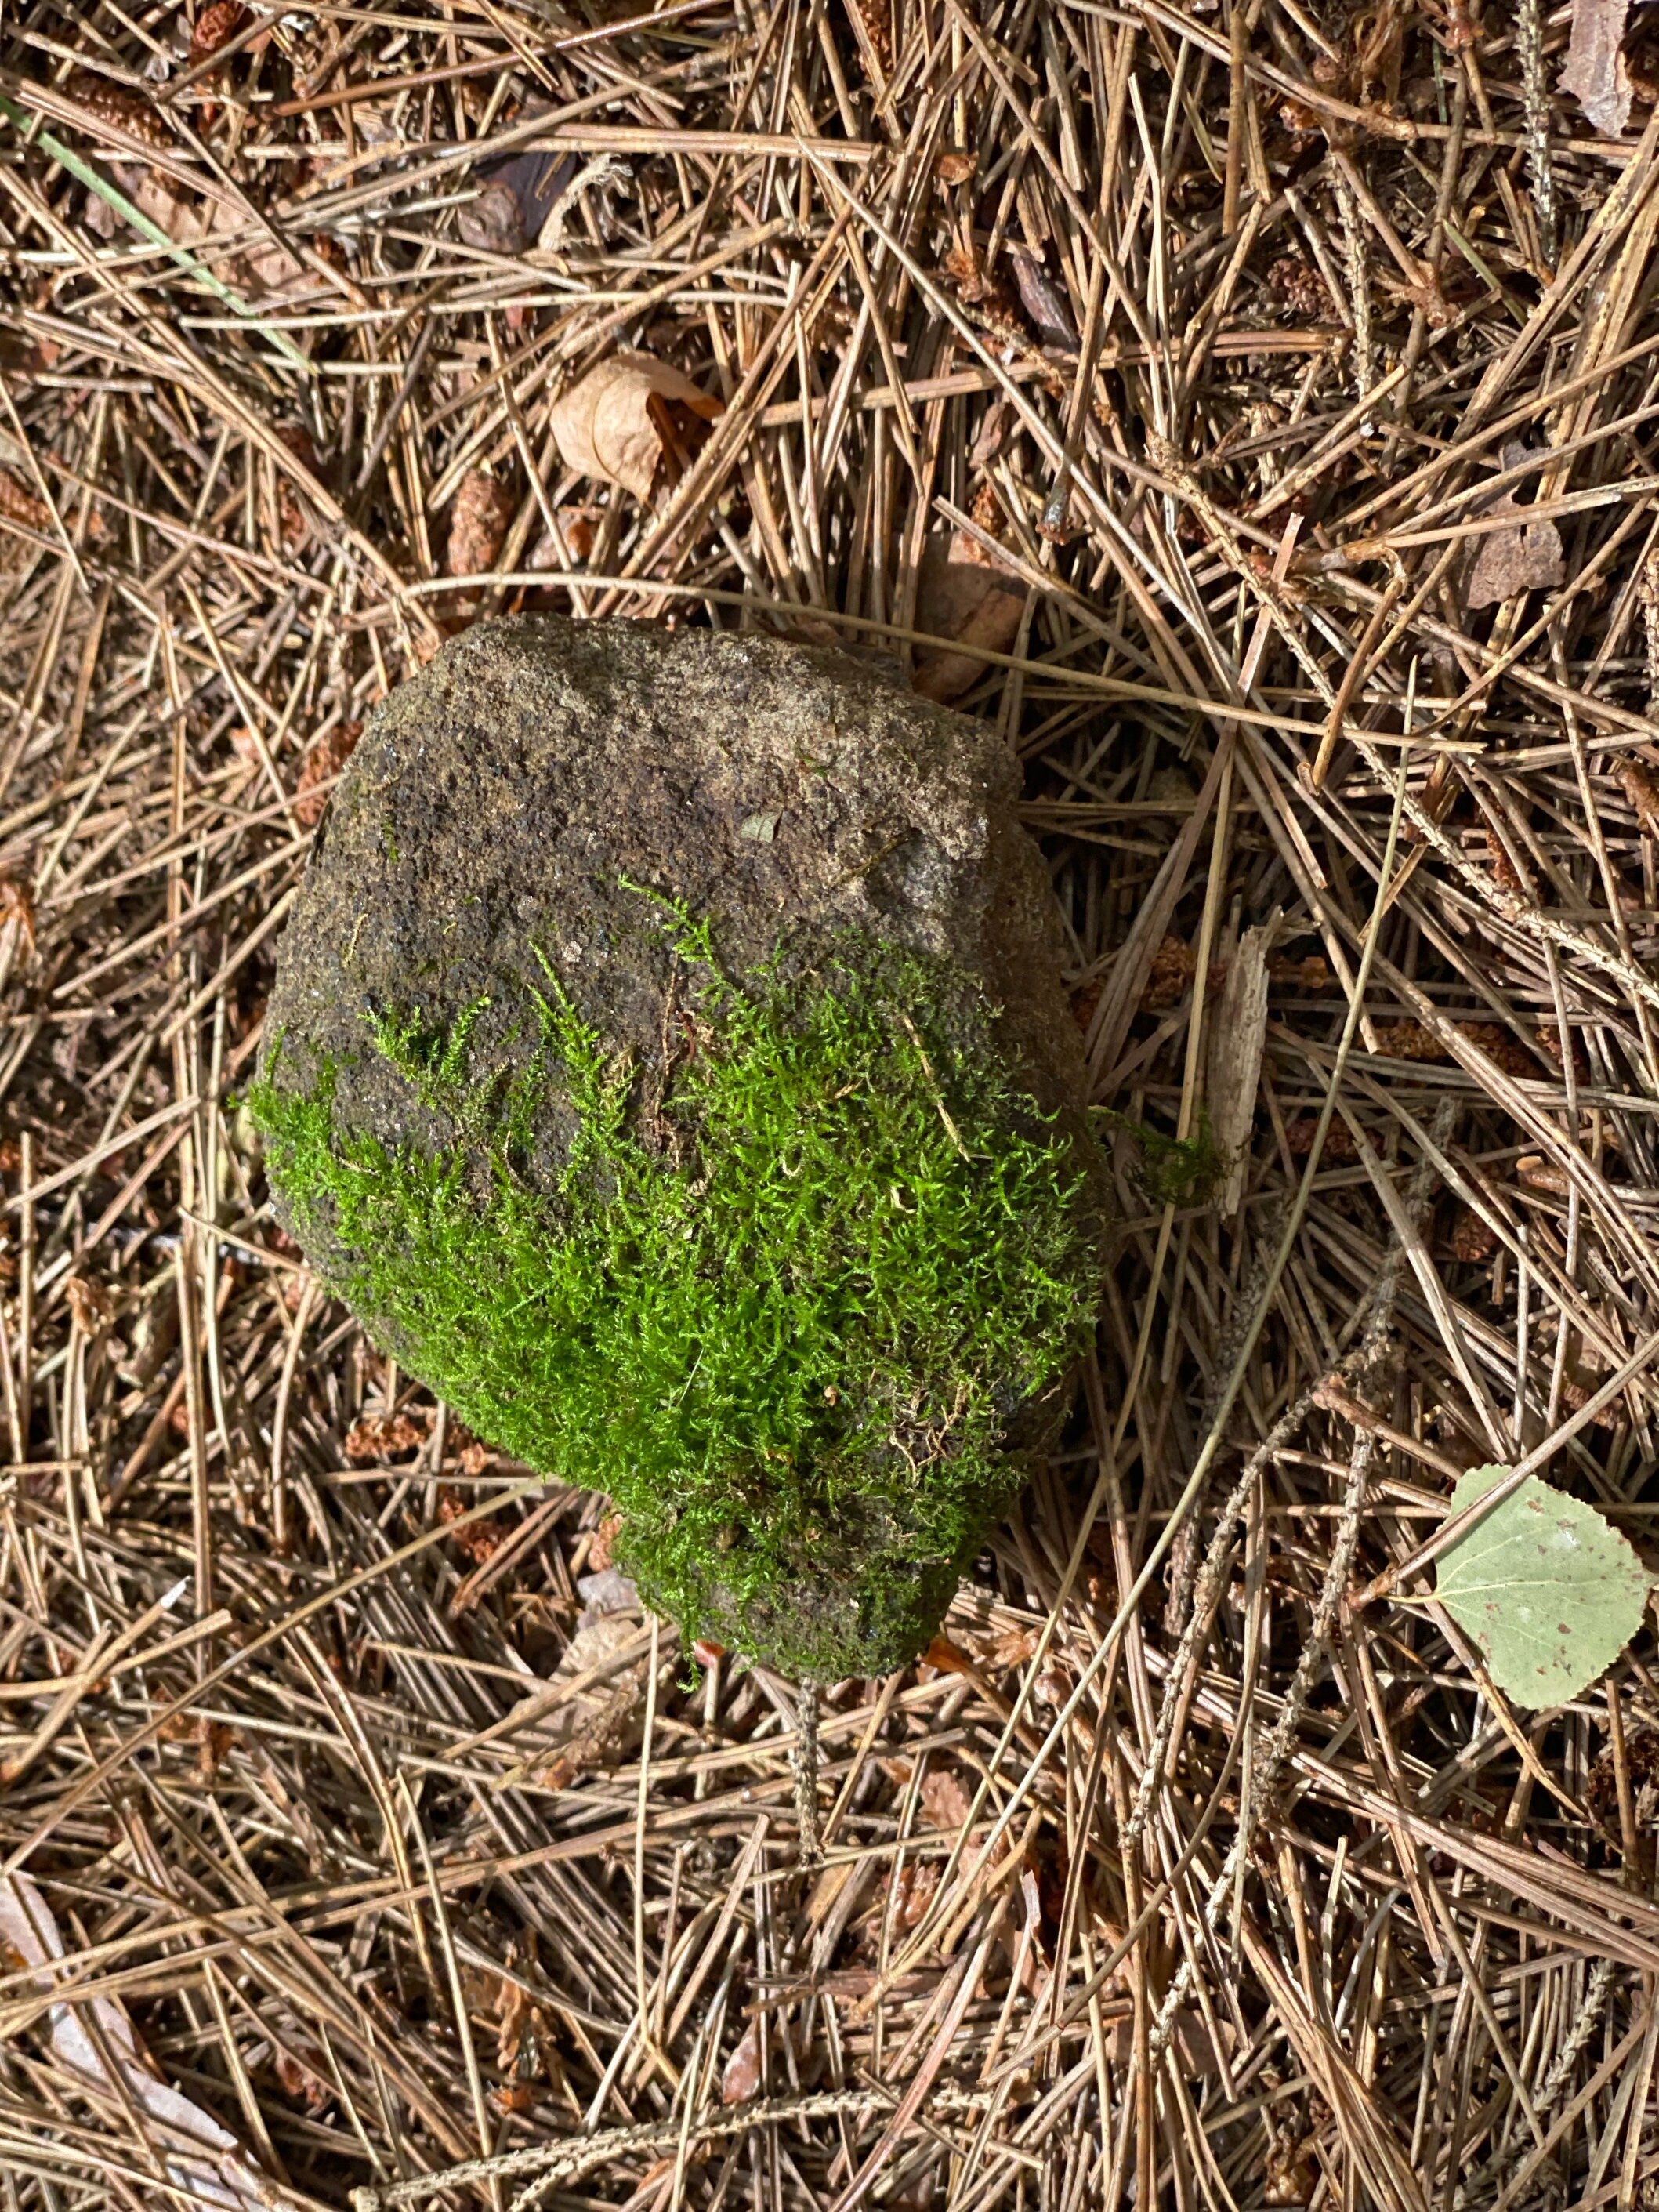 Live Moss Covered Rock, About 4 by 3 by 2 Inches in Size